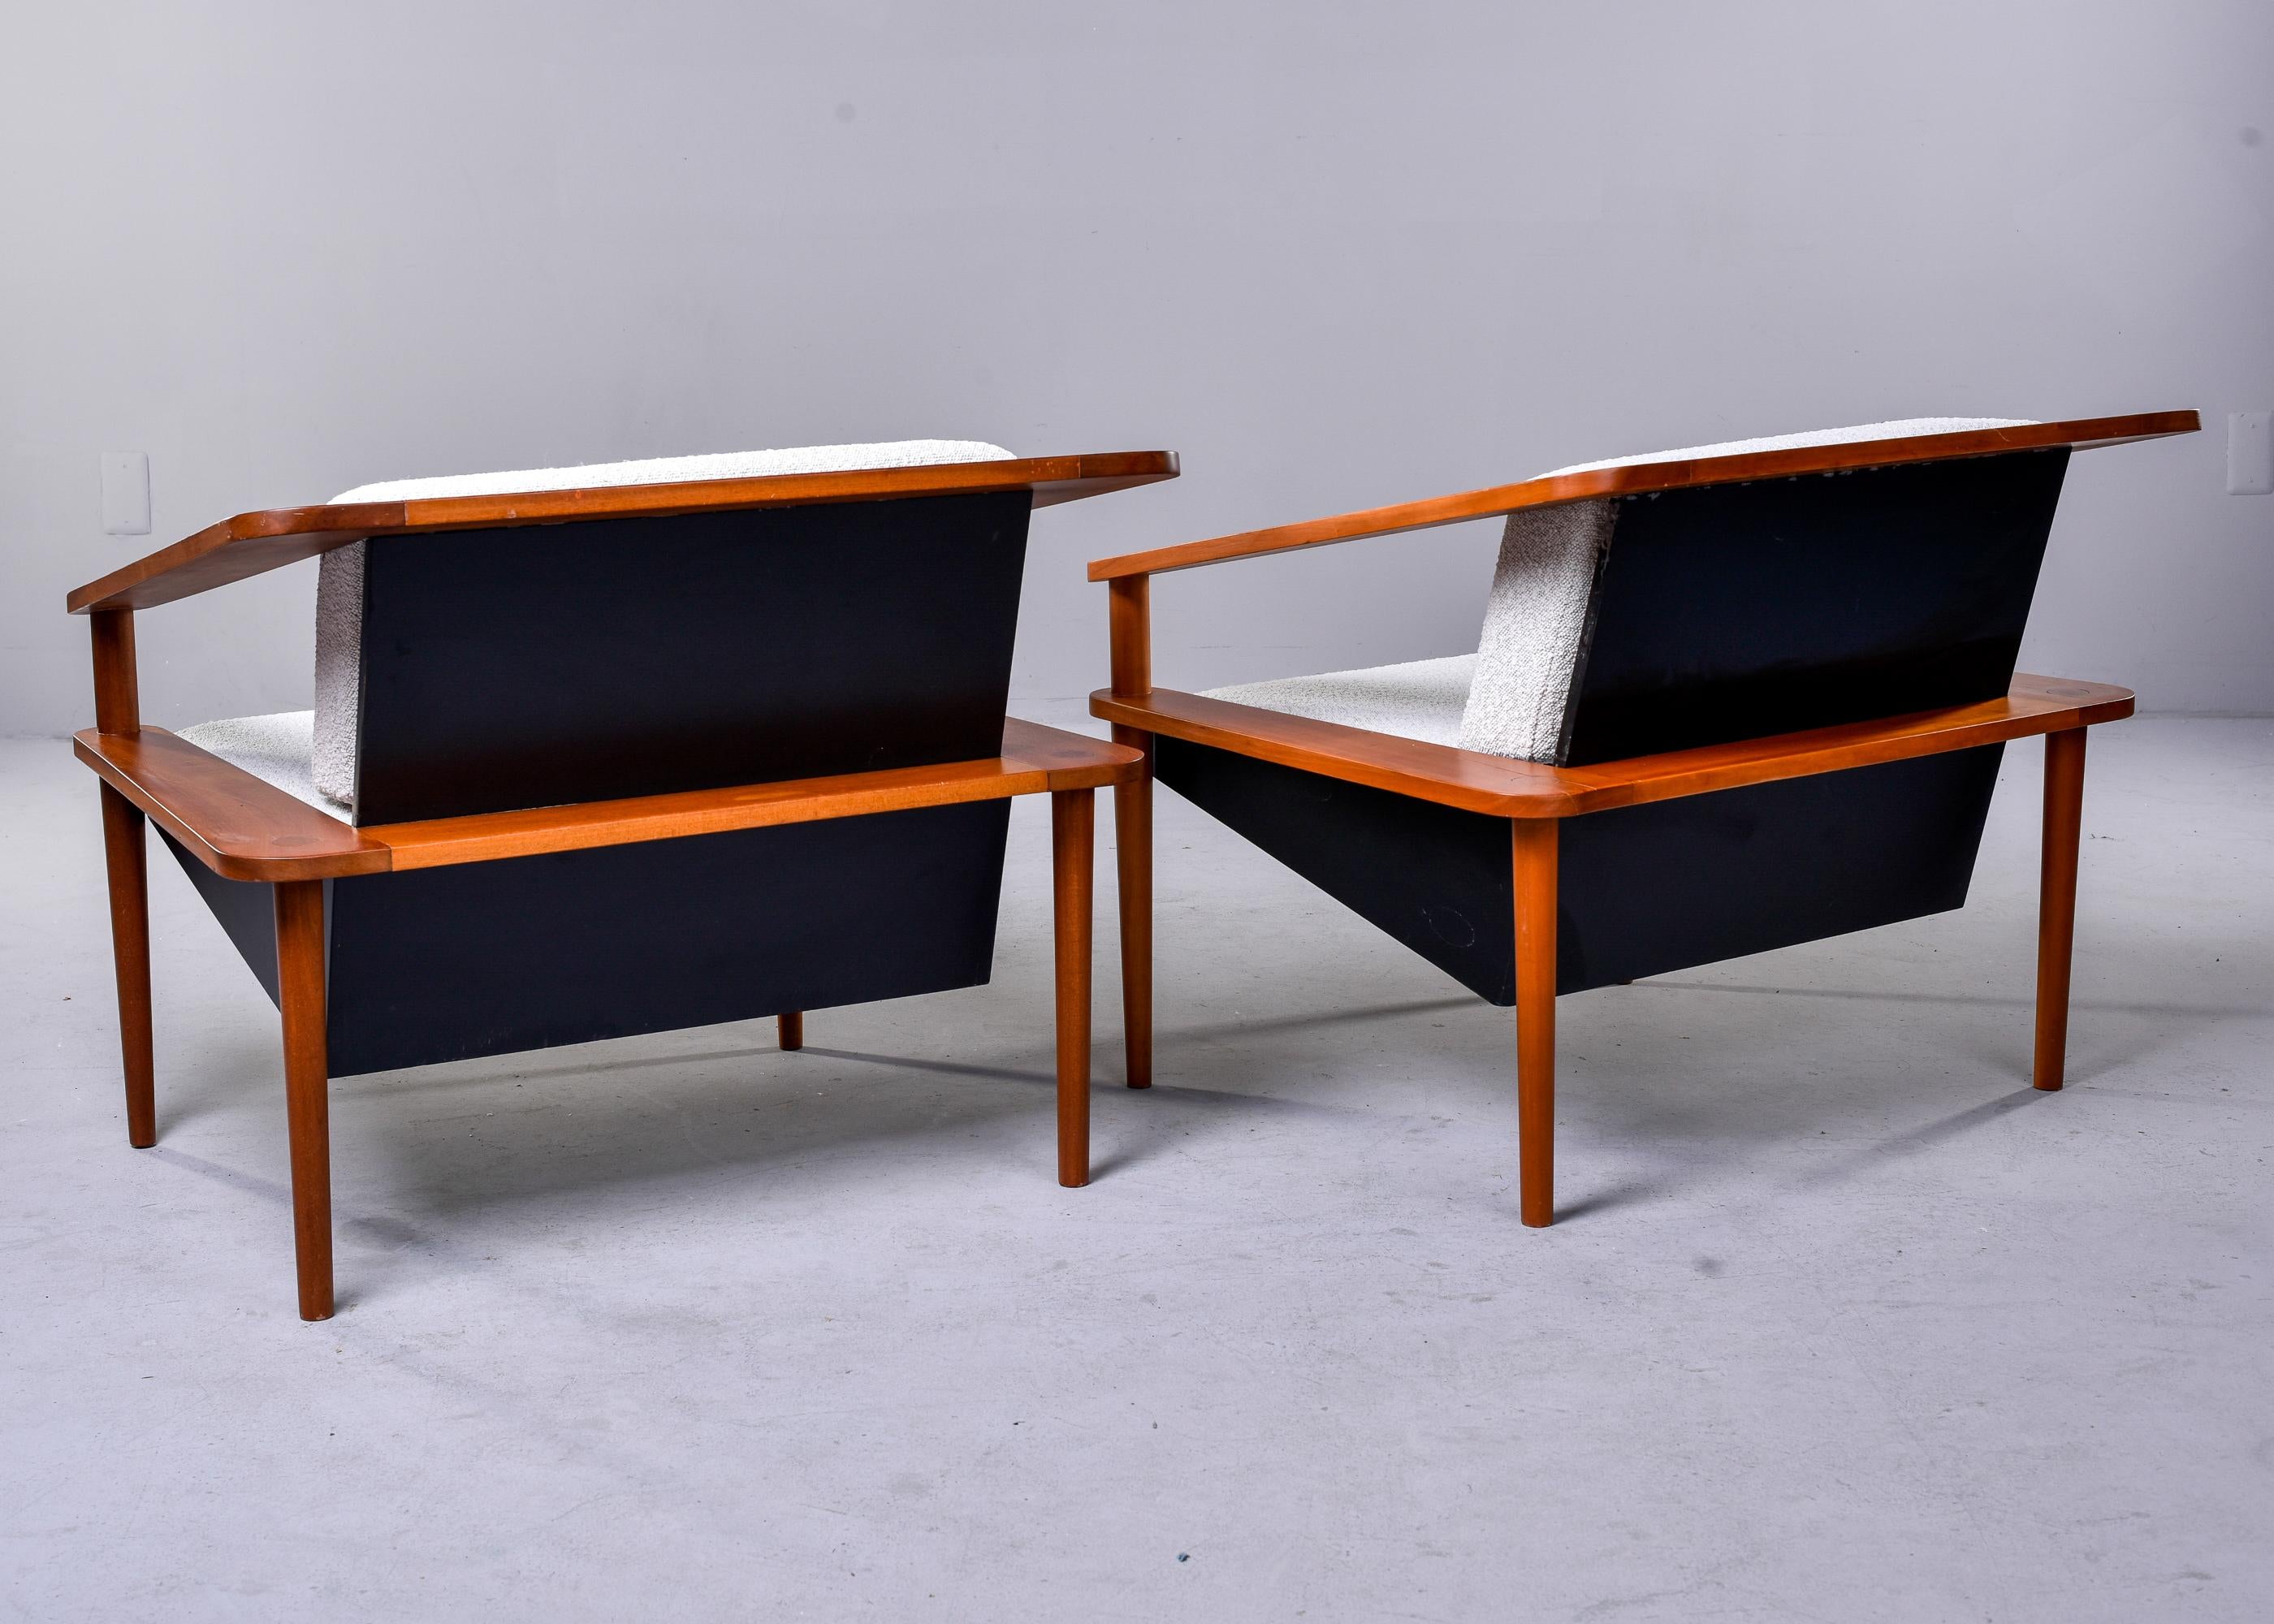 Upholstery Pair Unusual Mid Century Sculptural Cube Chairs with Teak Frames For Sale